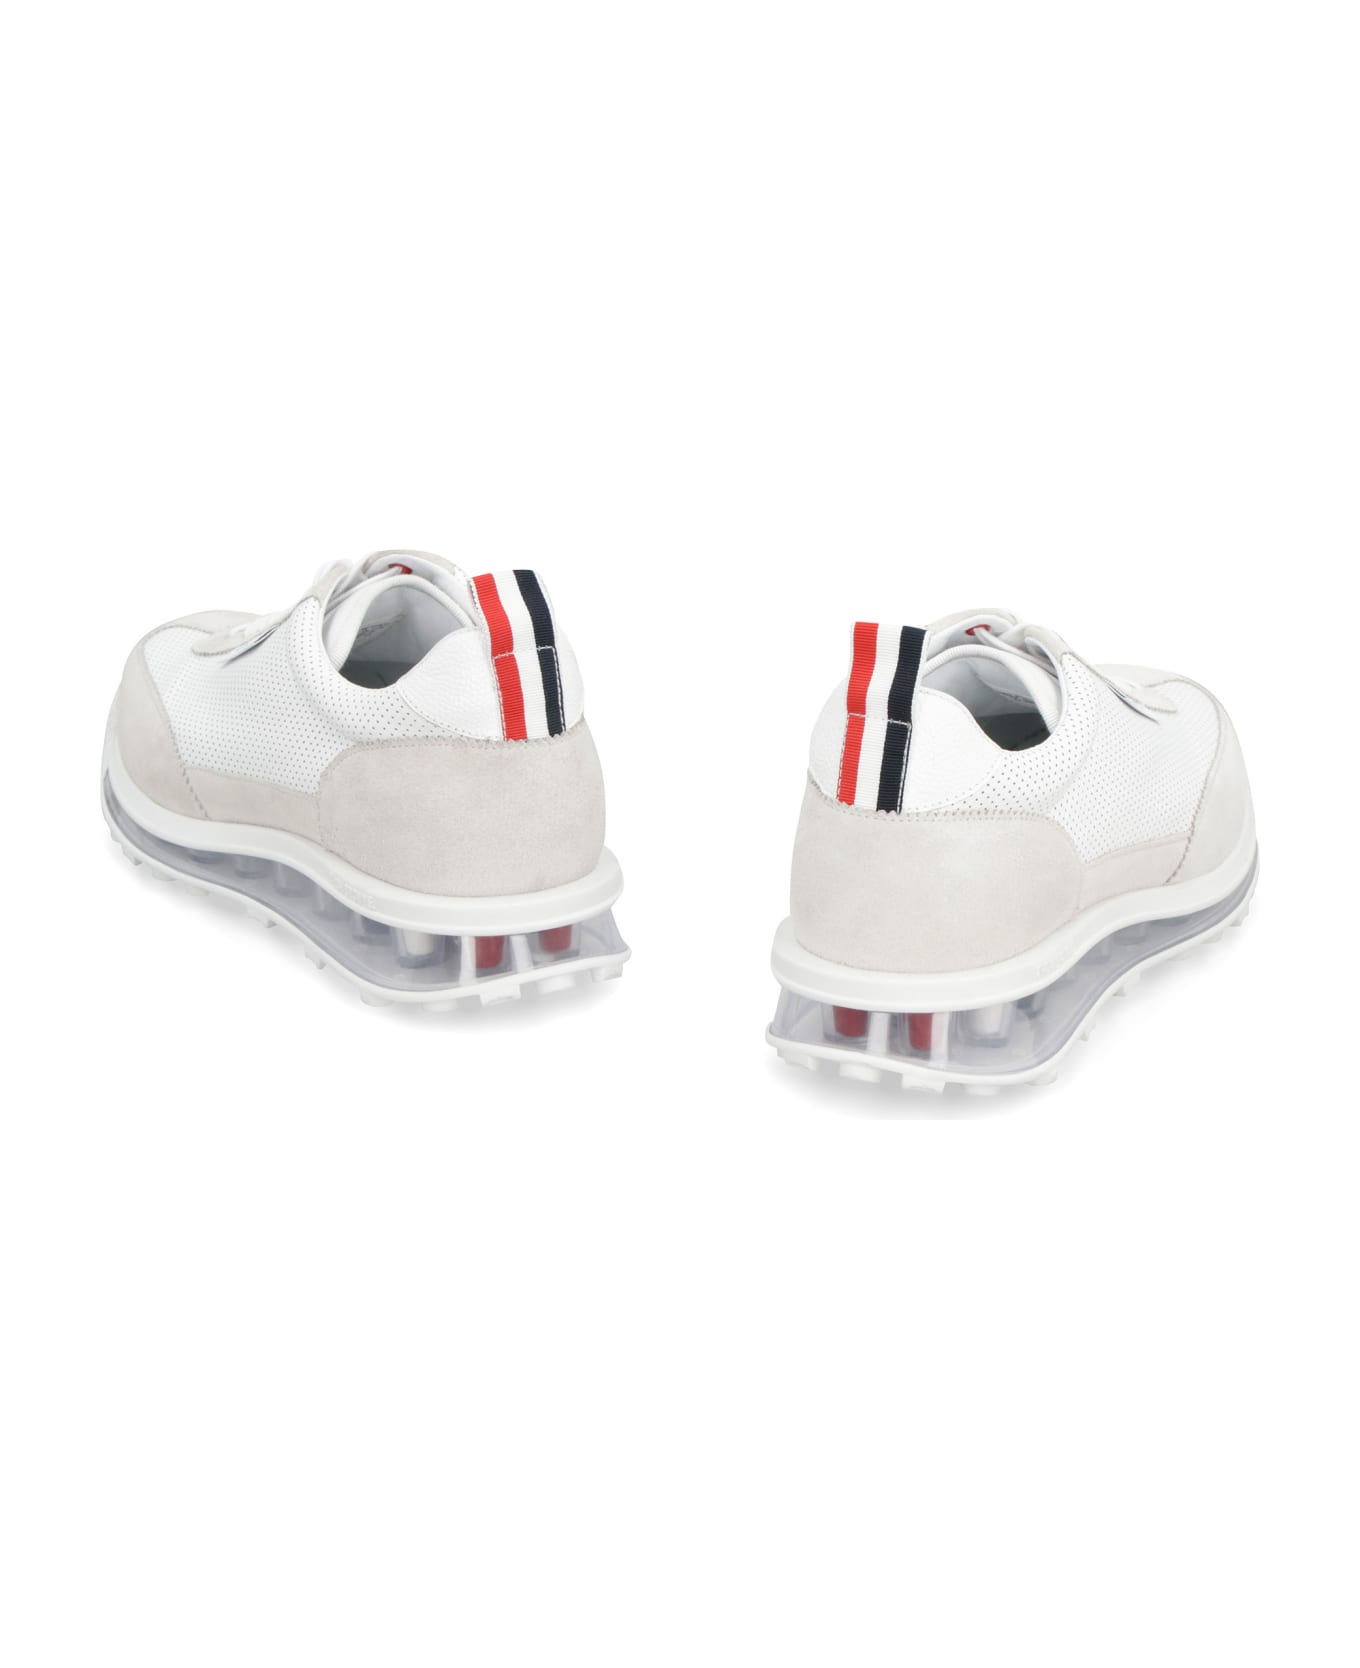 Thom Browne Leather Low-top Sneakers - White スニーカー